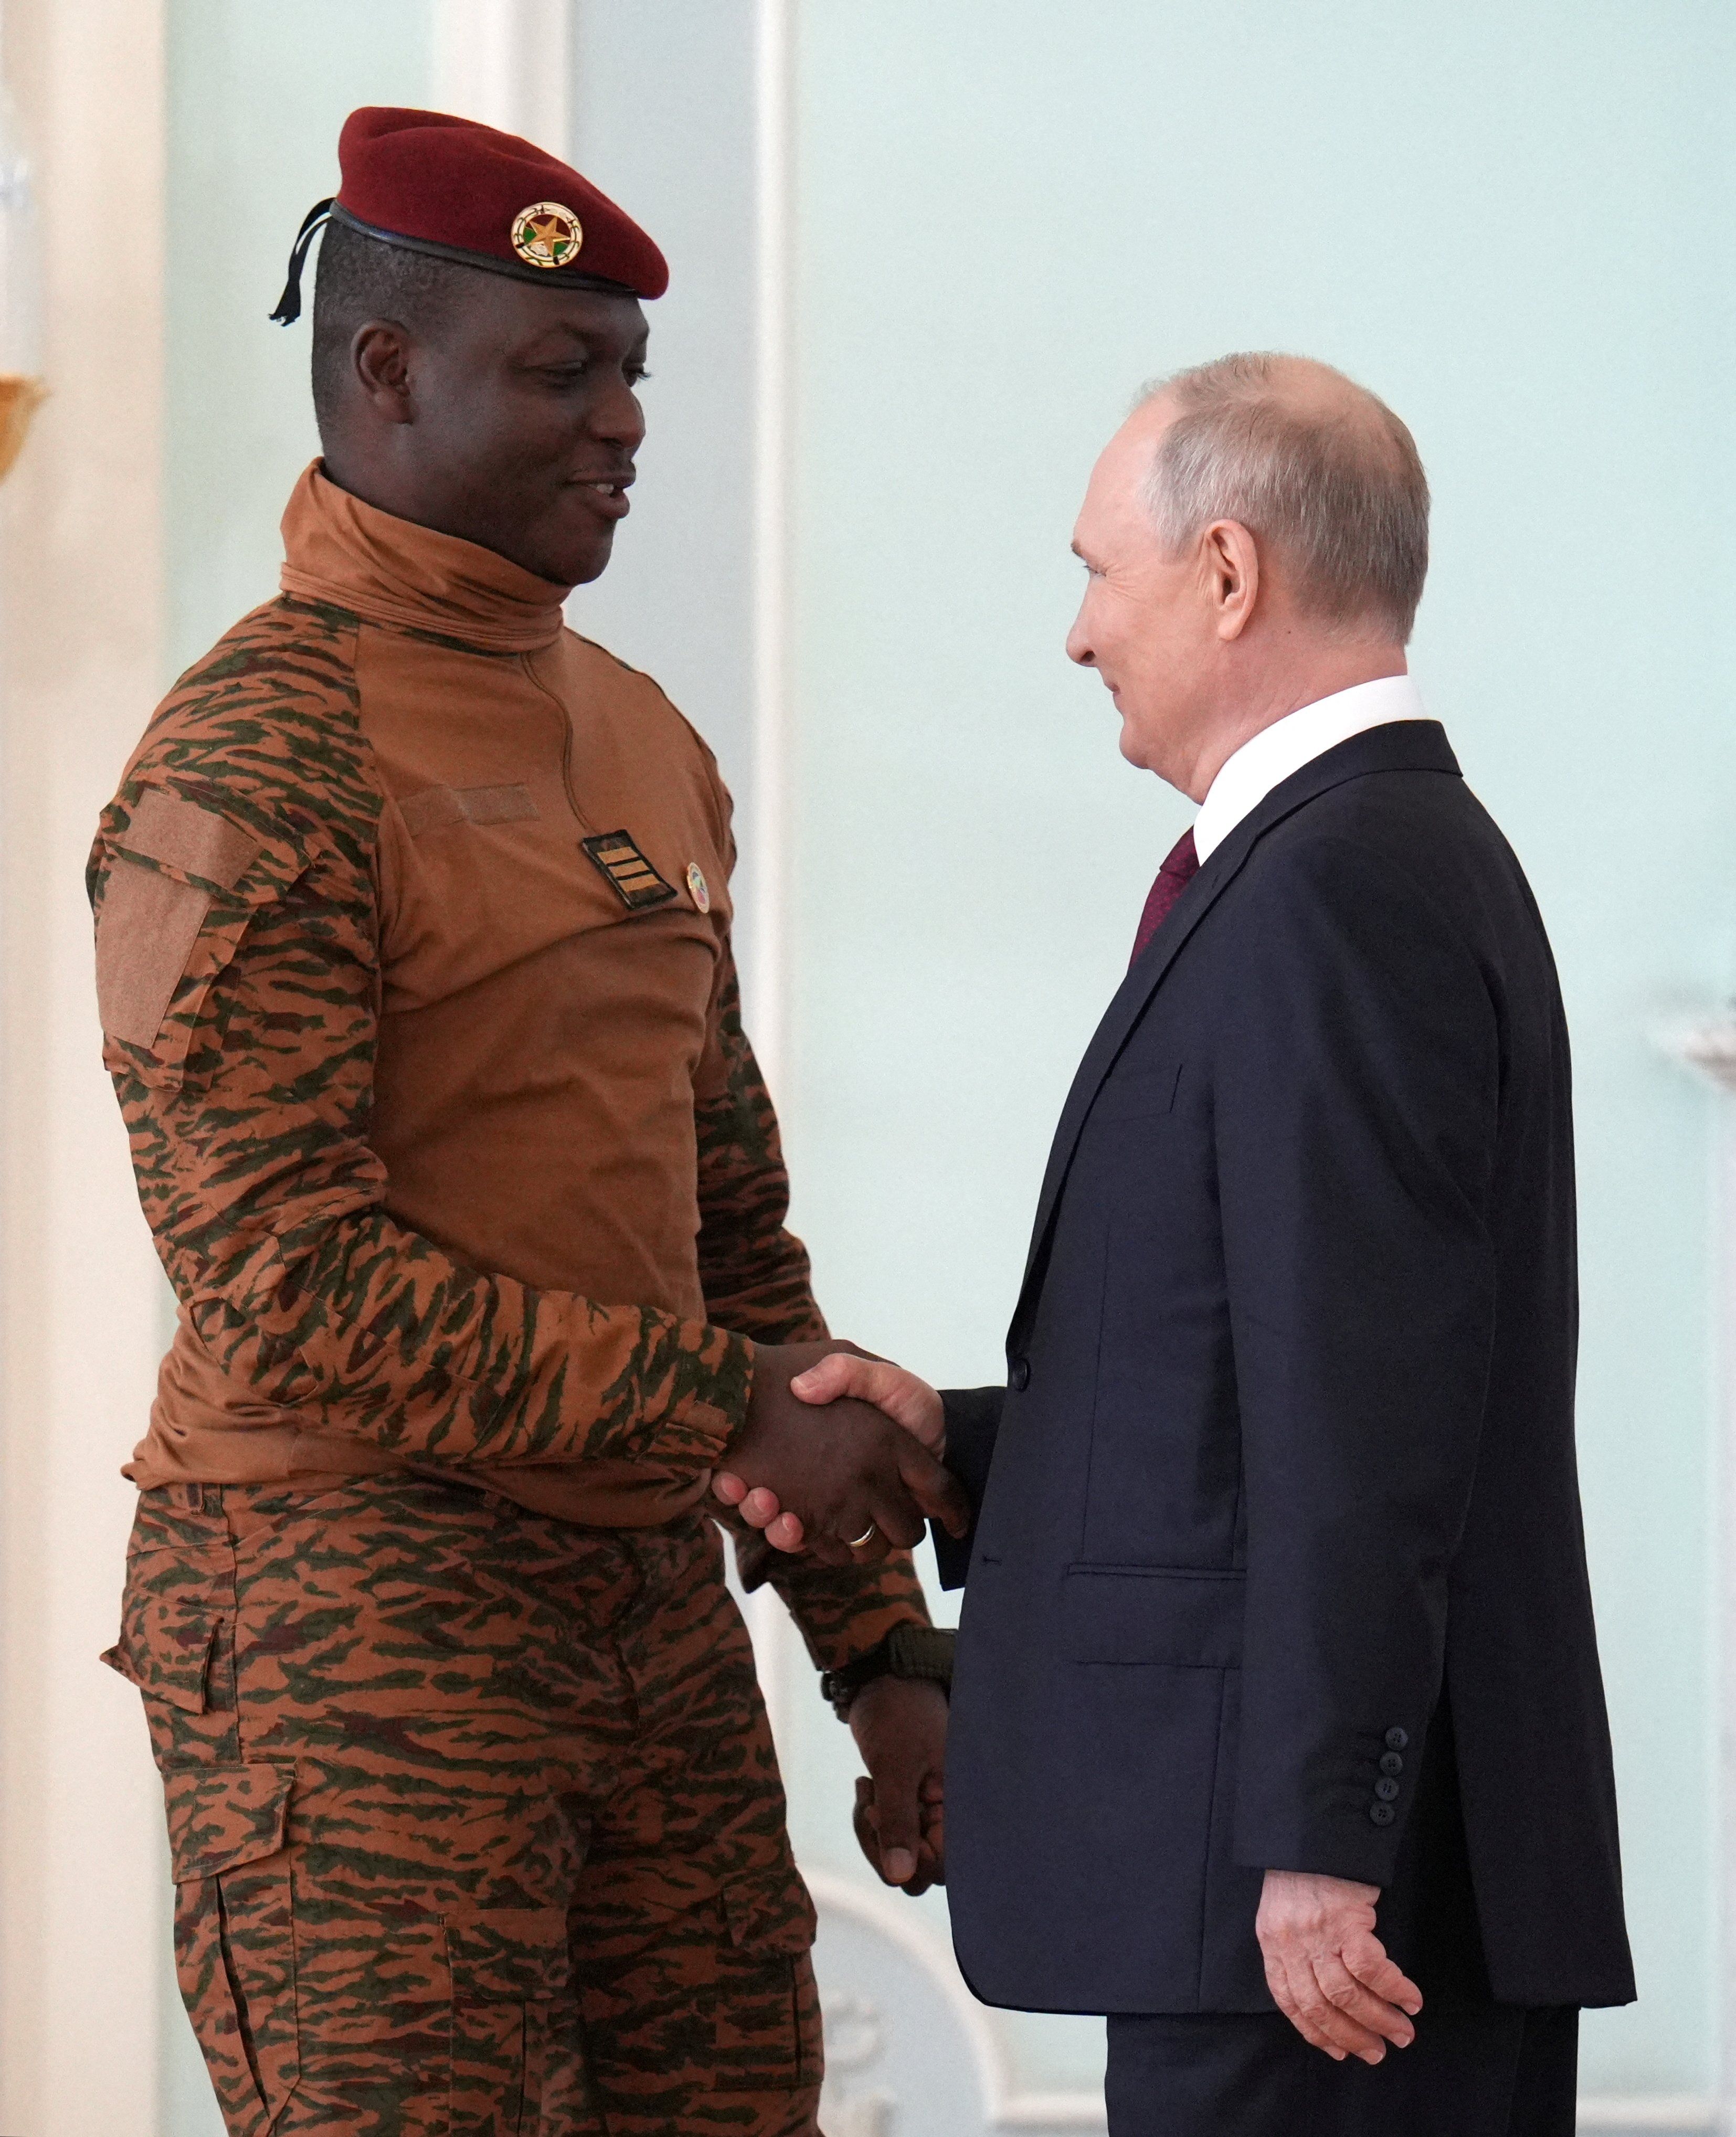 ​Russia's President Vladimir Putin shakes hands with Burkina Faso's interim President Ibrahim Traore at the Russia-Africa Summit in Russia in July.